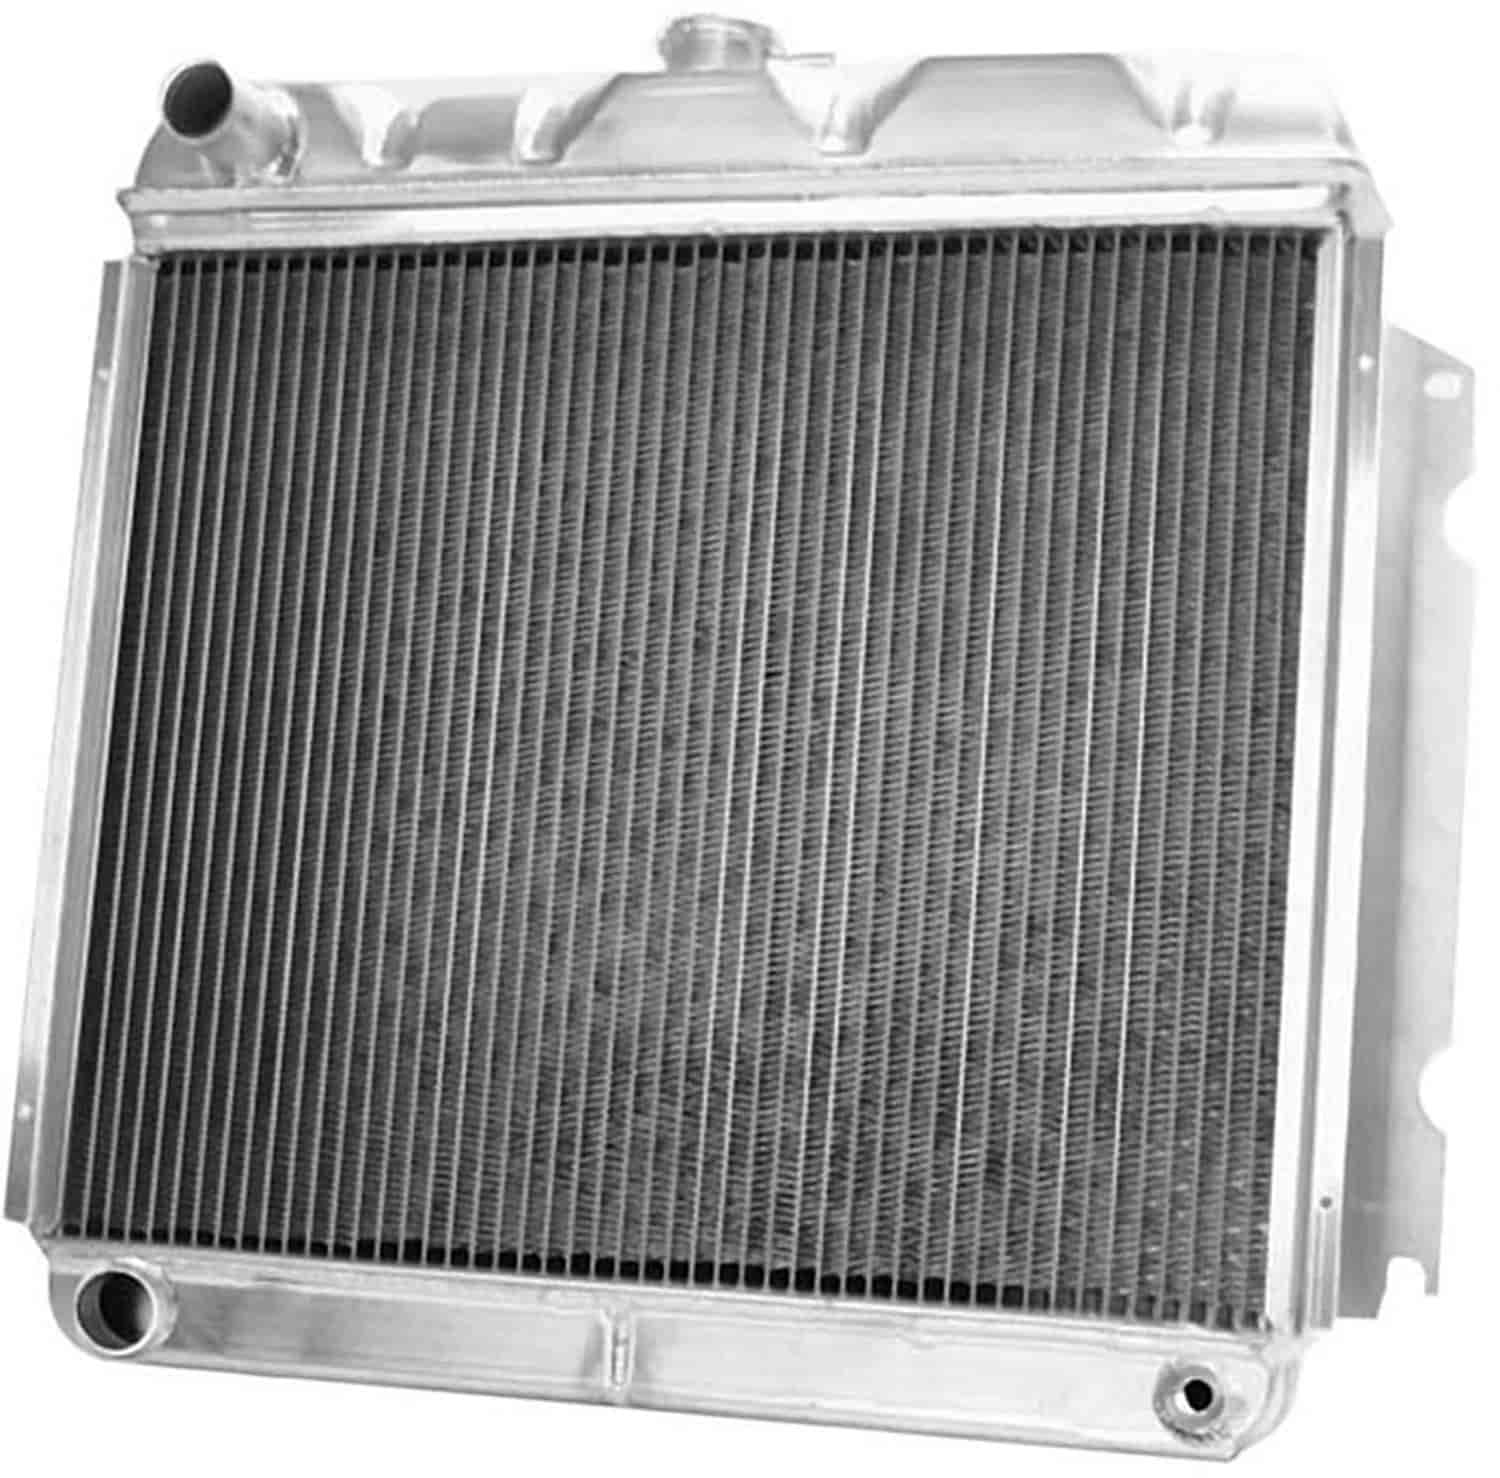 ExactFit Radiator for 1967-1969 Chrysler A Body Barracuda, Dart, Scamp, & Valiant with Small Block